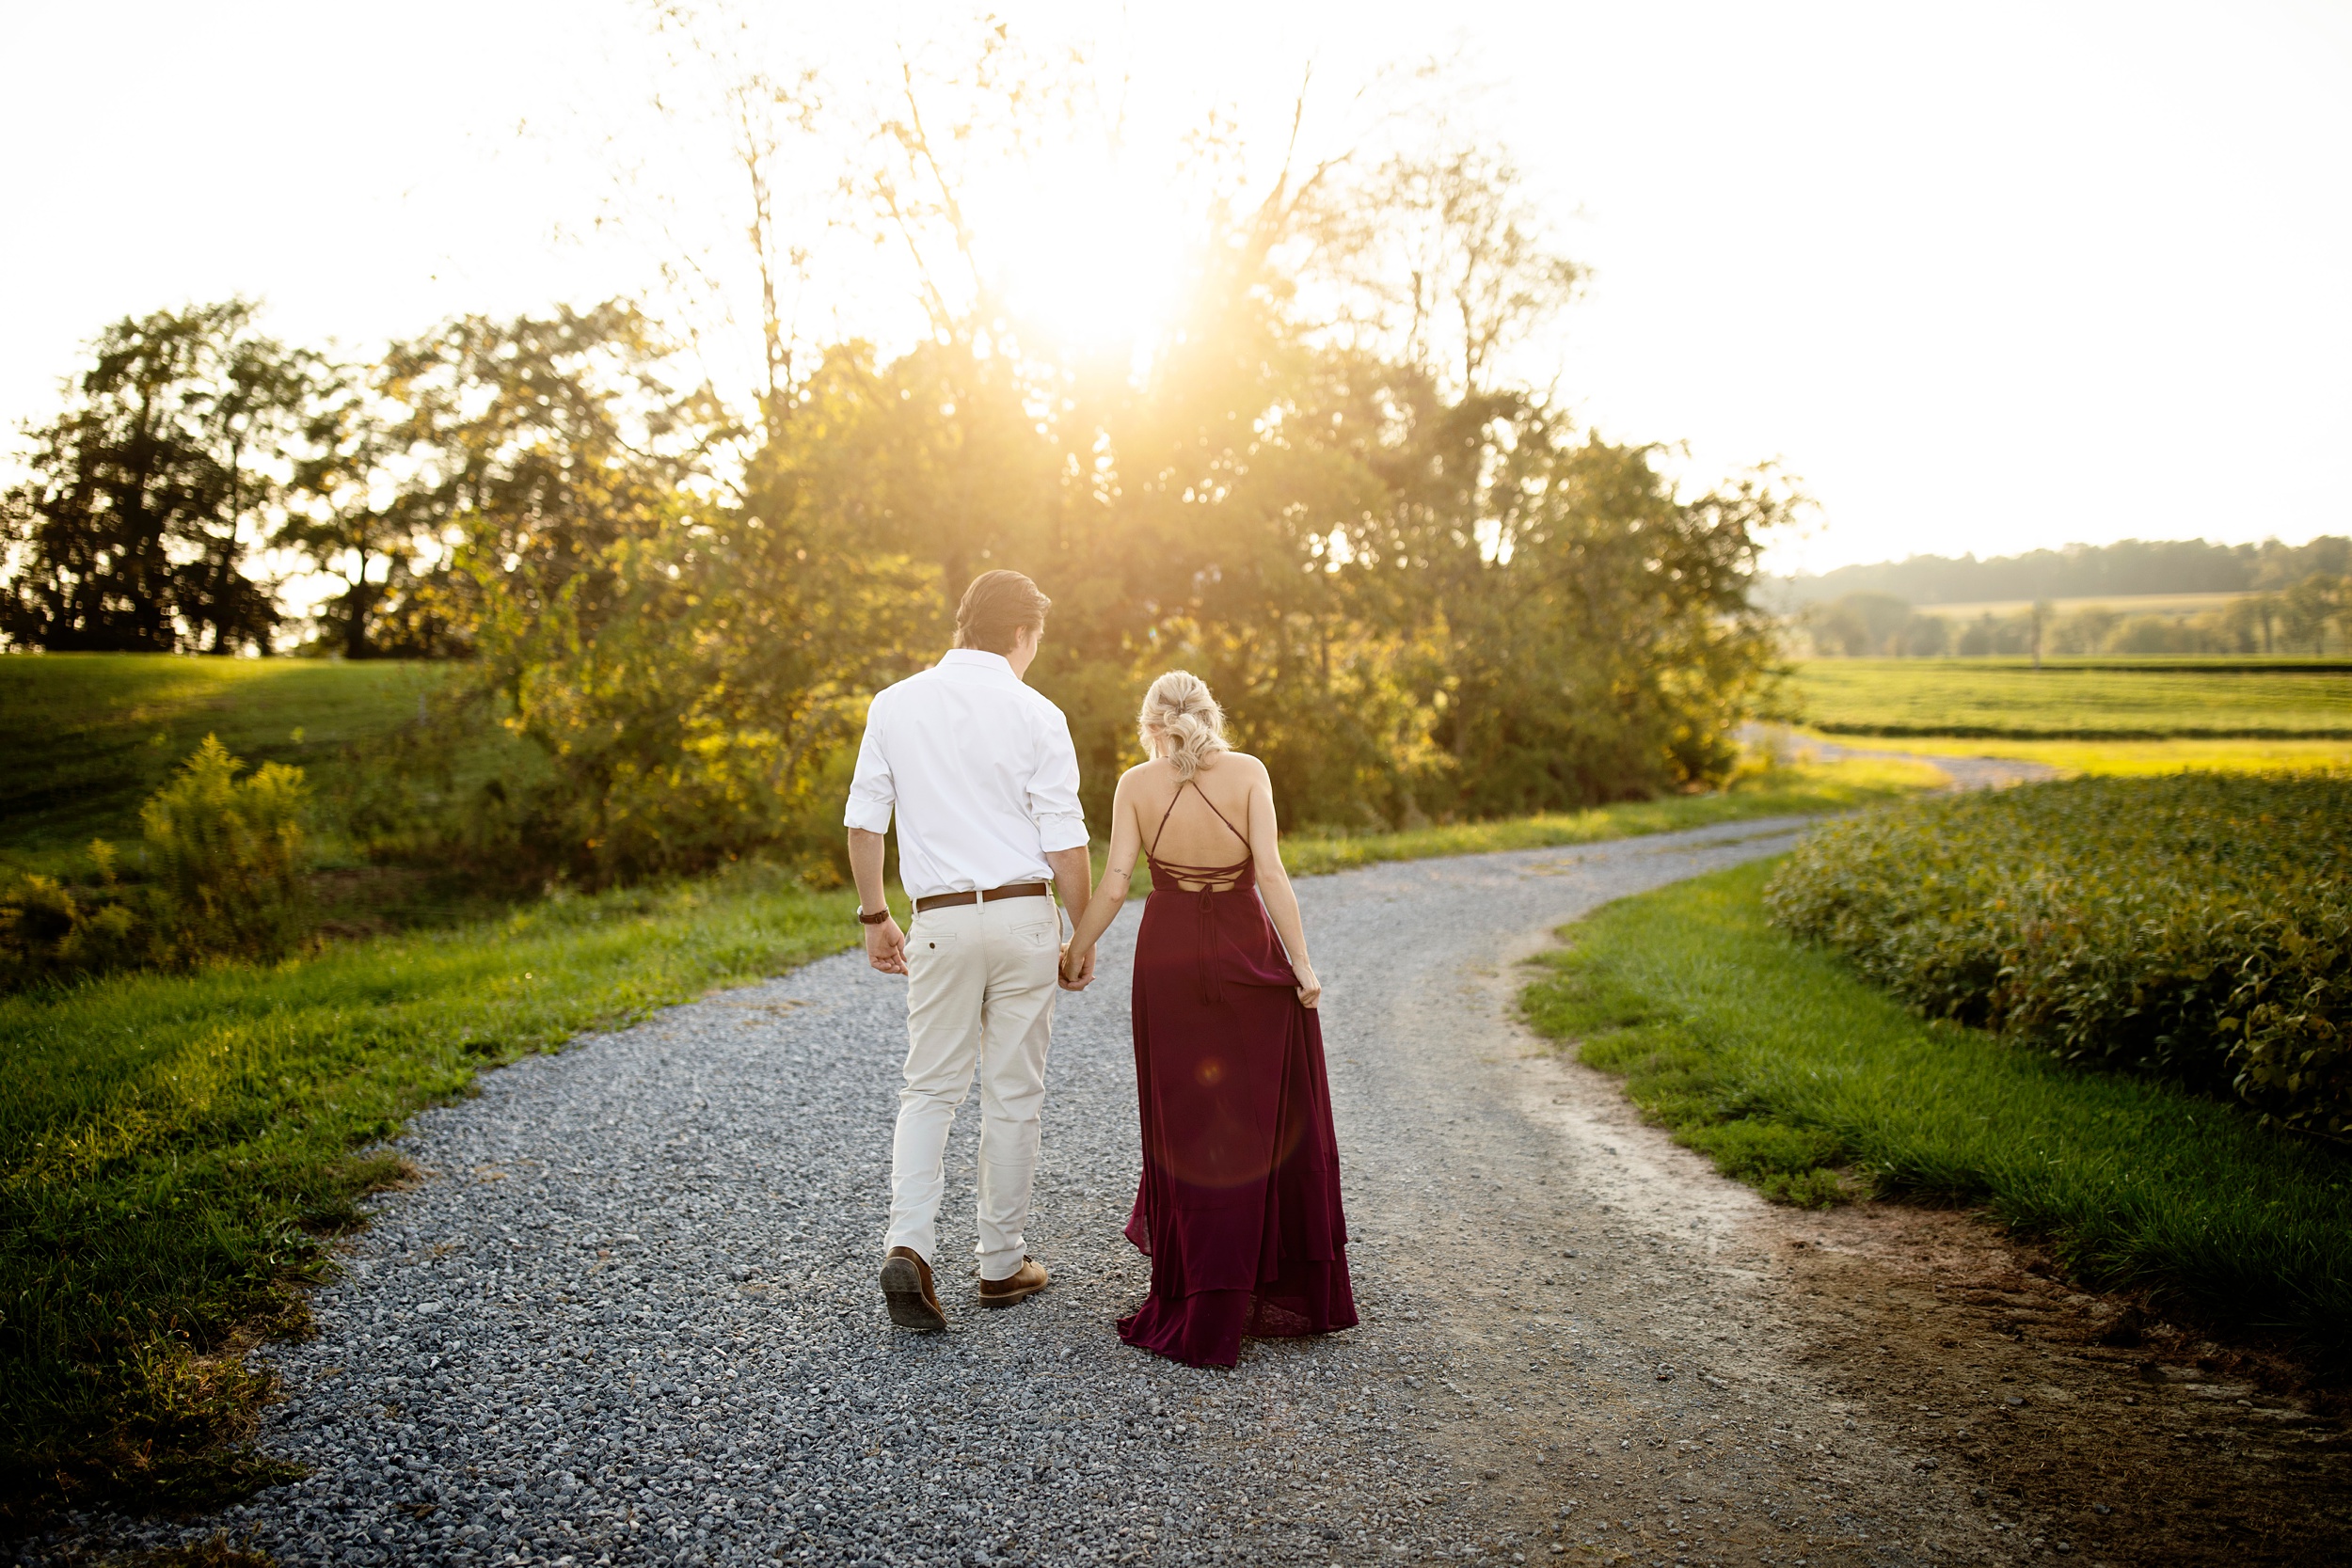 Harvest View Barn Engagement Photos-Lancaster Pa Wedding and Engagement Photographer